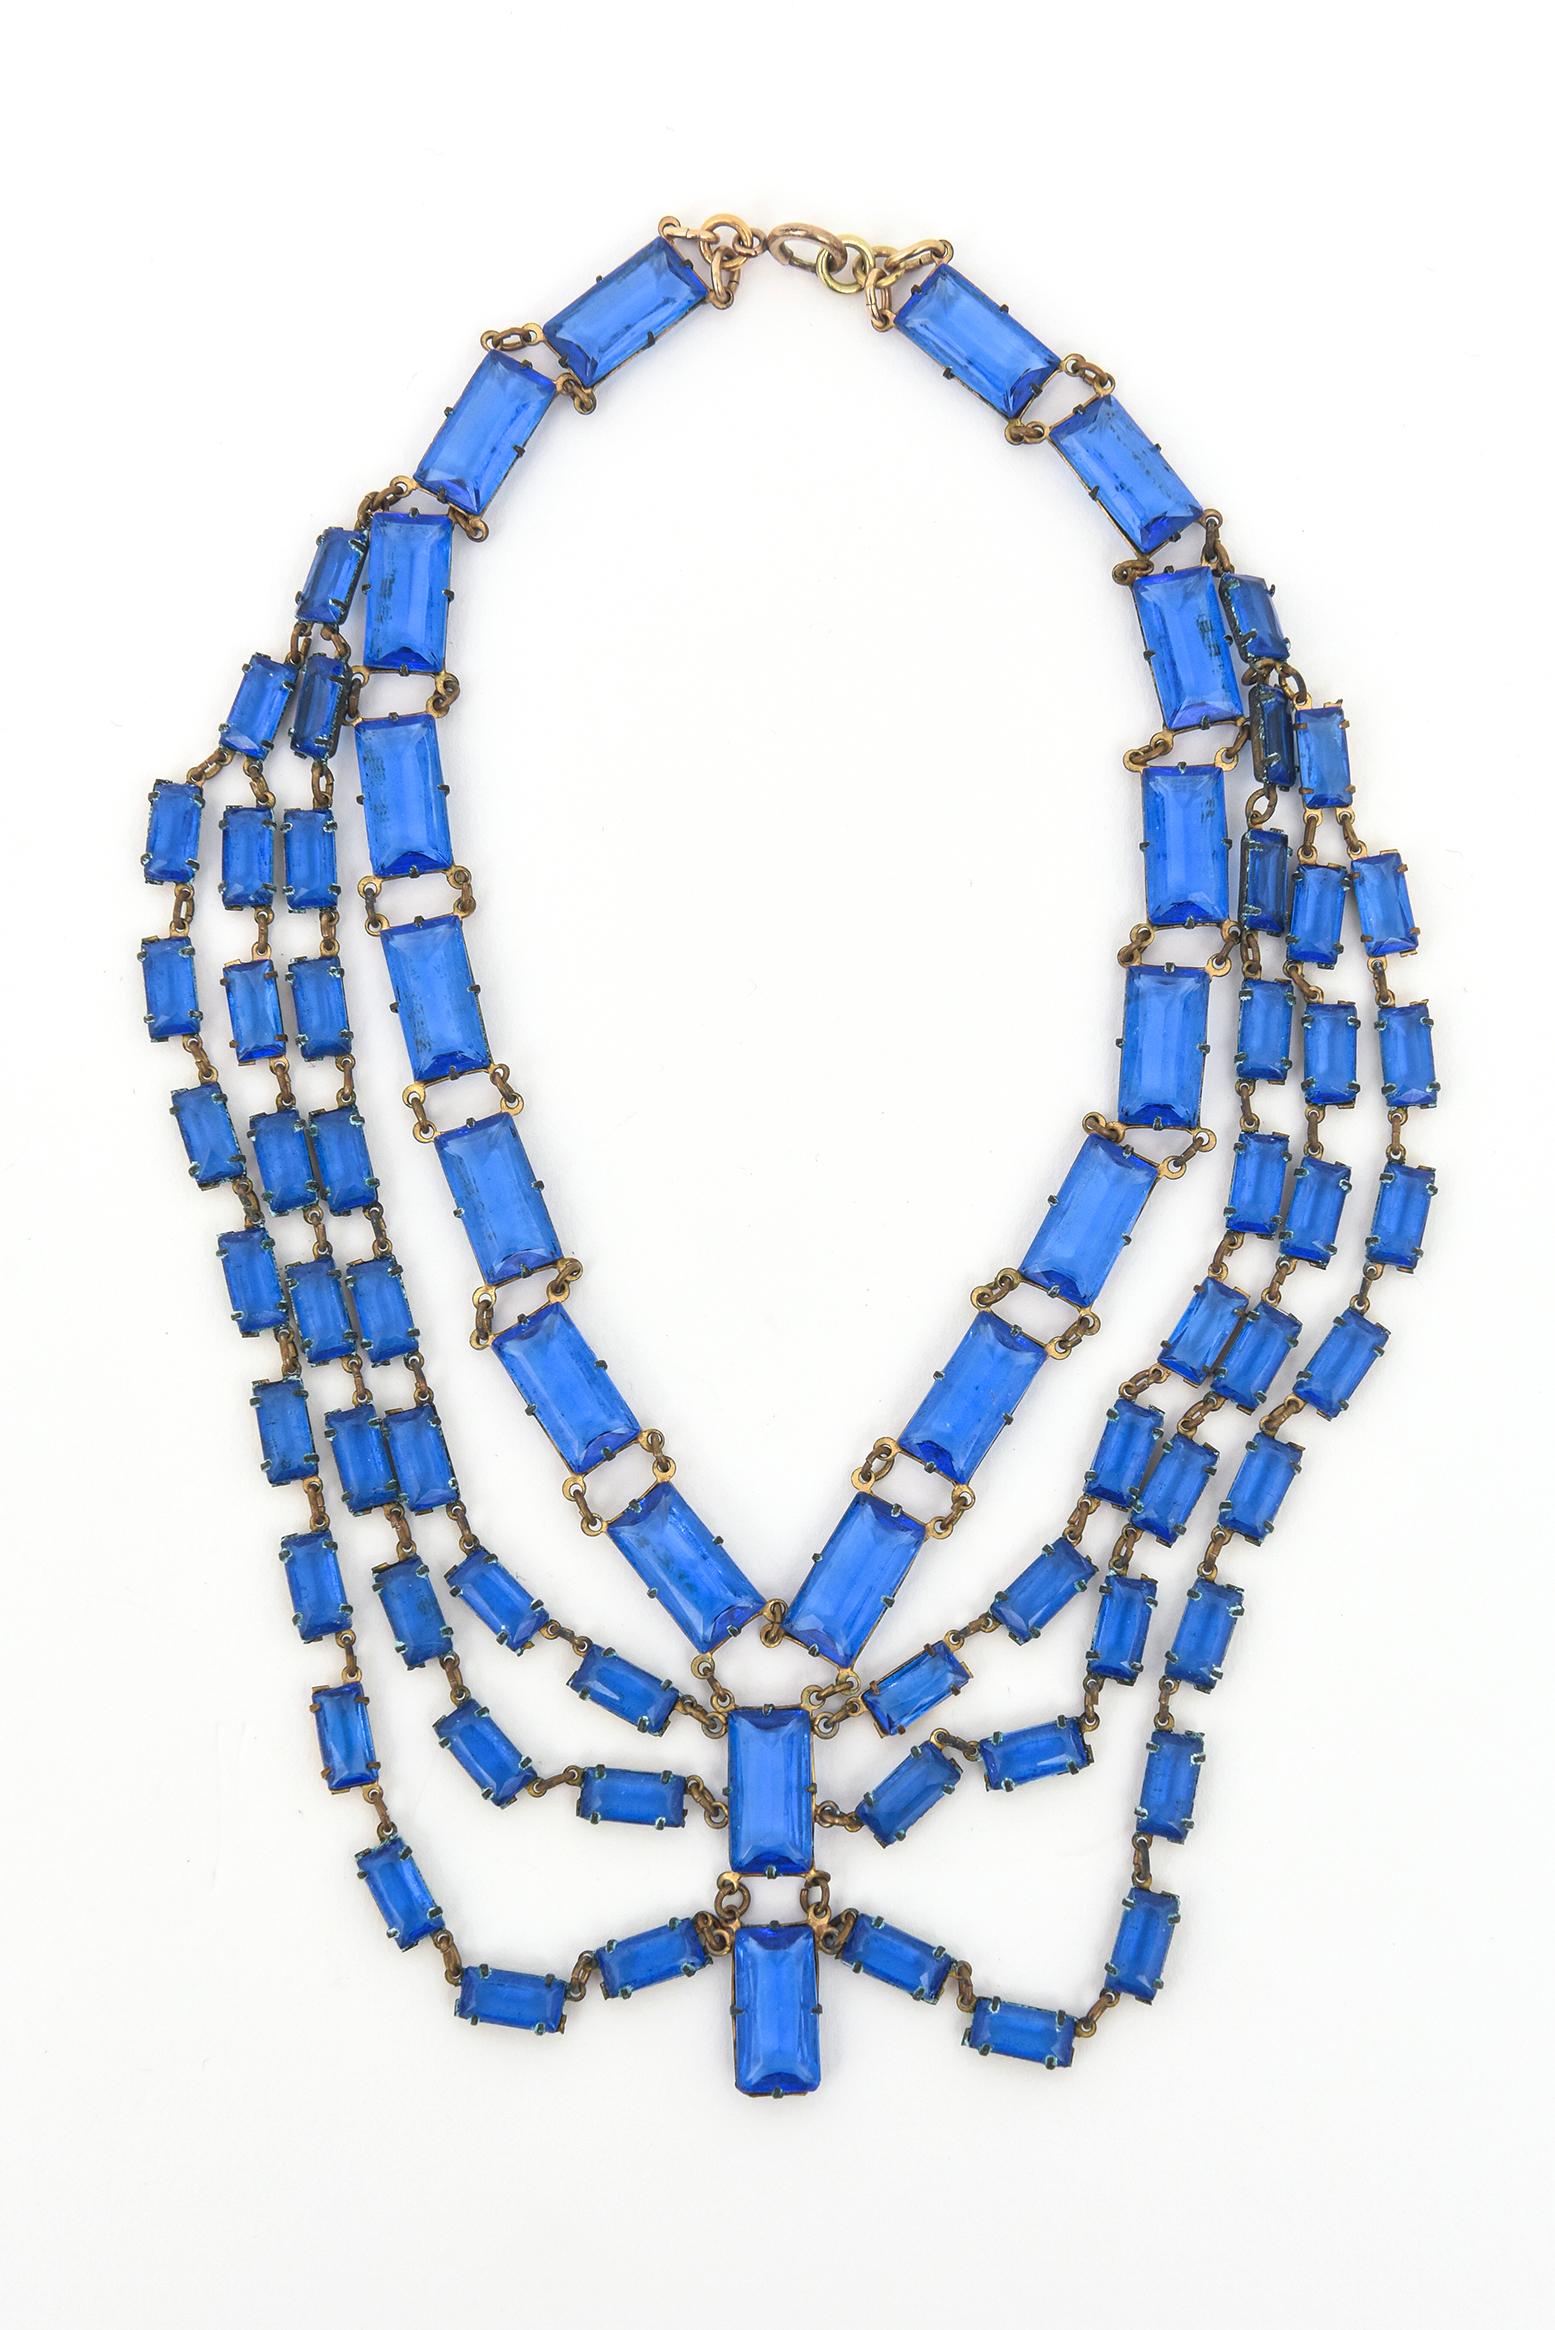 This stunning and elegant vintage original Art deco multi tier and multi strand cerulean blue glass necklace is amazing on the neck. There are 4 graduated rows and a few pendant glass disks hanging. We have had in our archives now for over 35 years